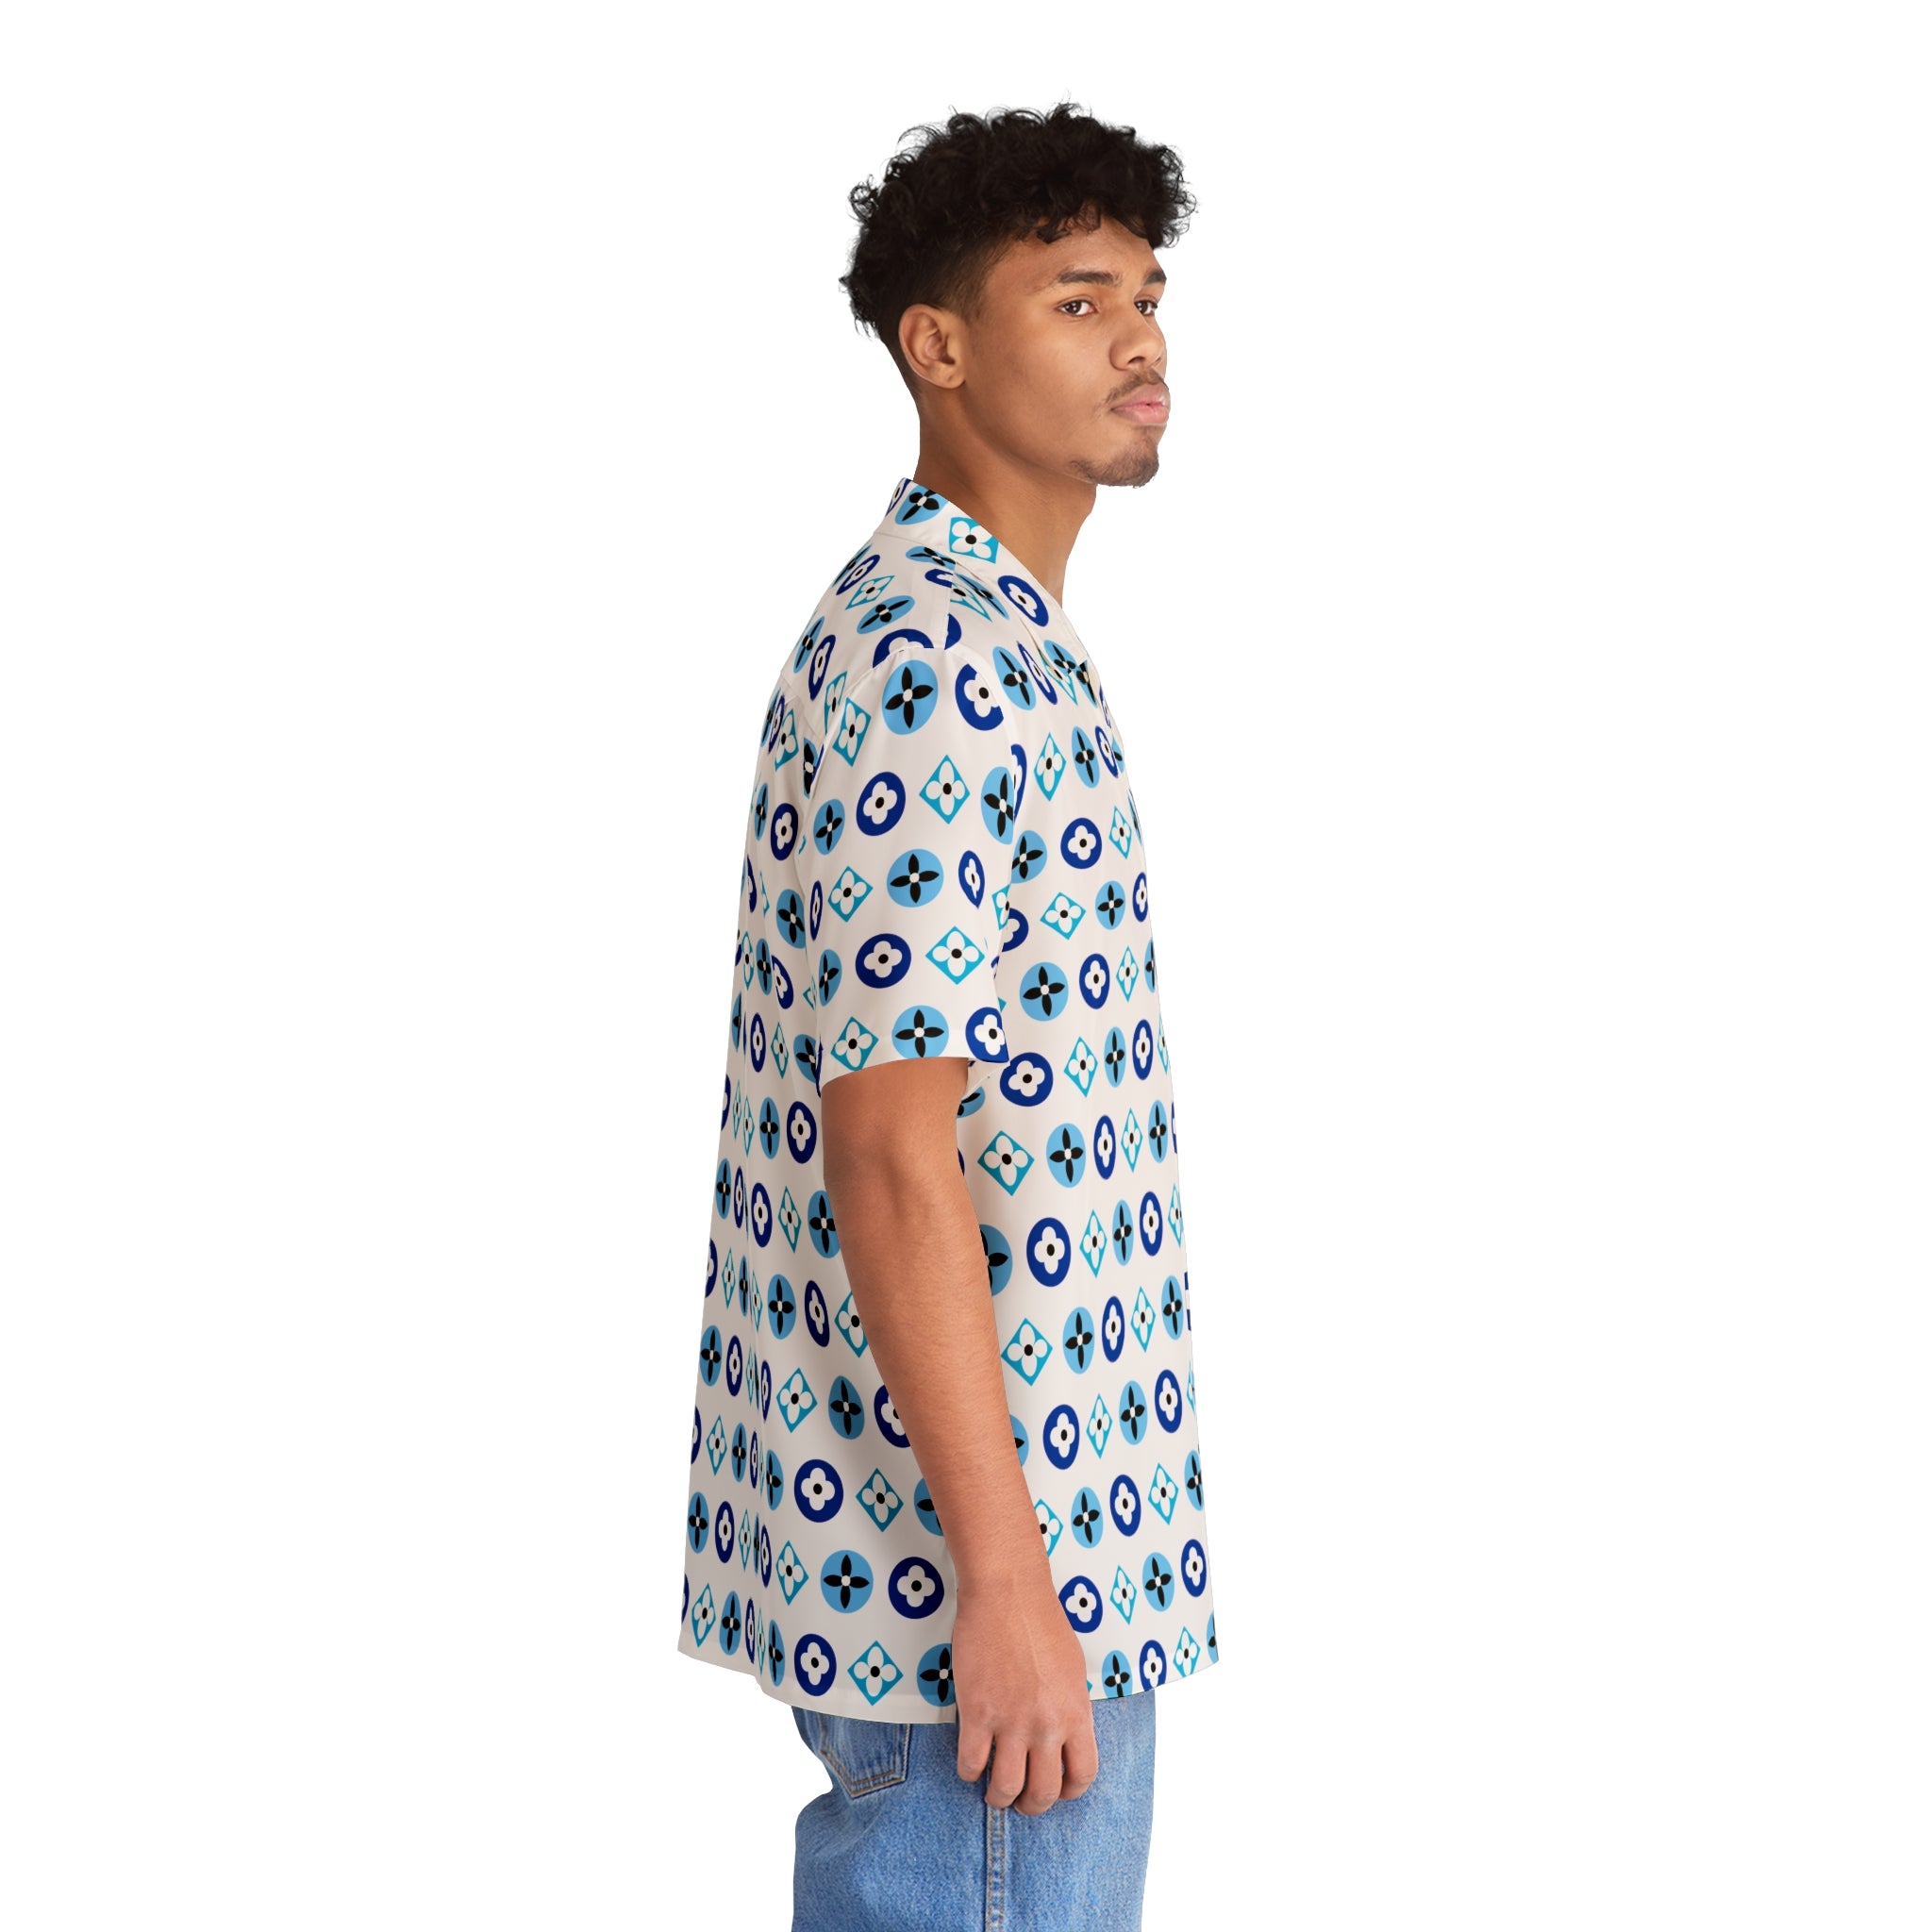 Groove Collection Trilogy of Icons Pattern (Blues) Unisex Gender Neutral White Button Up Shirt, Hawaiian Shirt